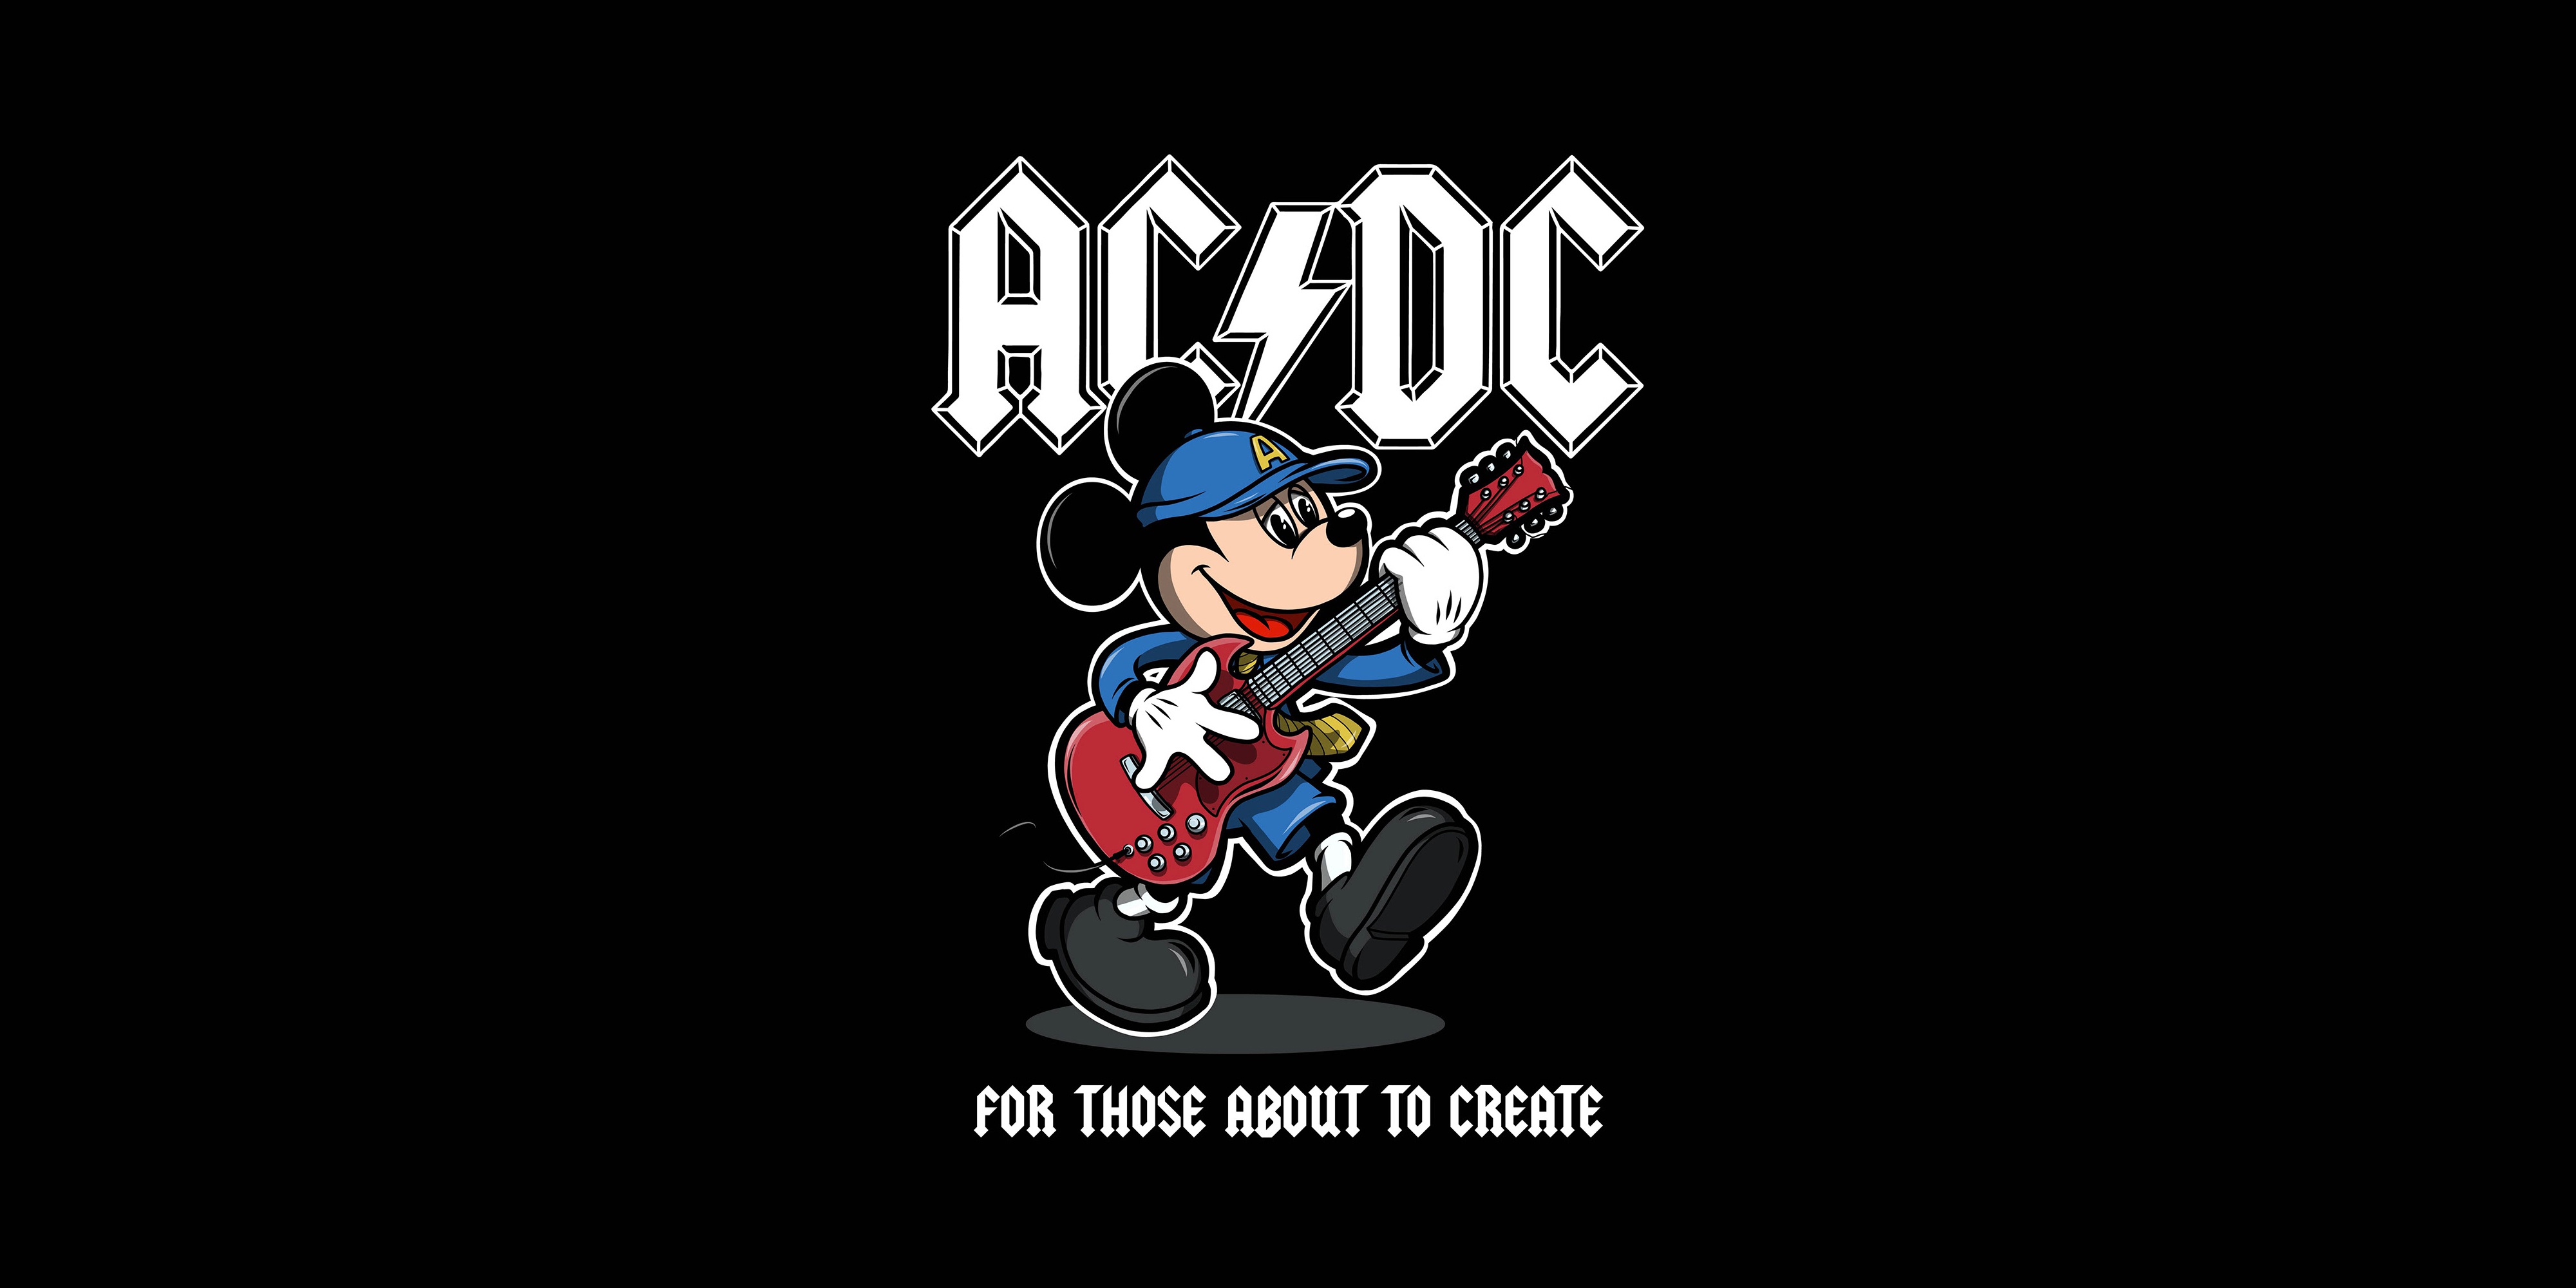 General 4000x2000 music Mickey Mouse artwork AC/DC typography guitar musical instrument Disney simple background black background logo band logo